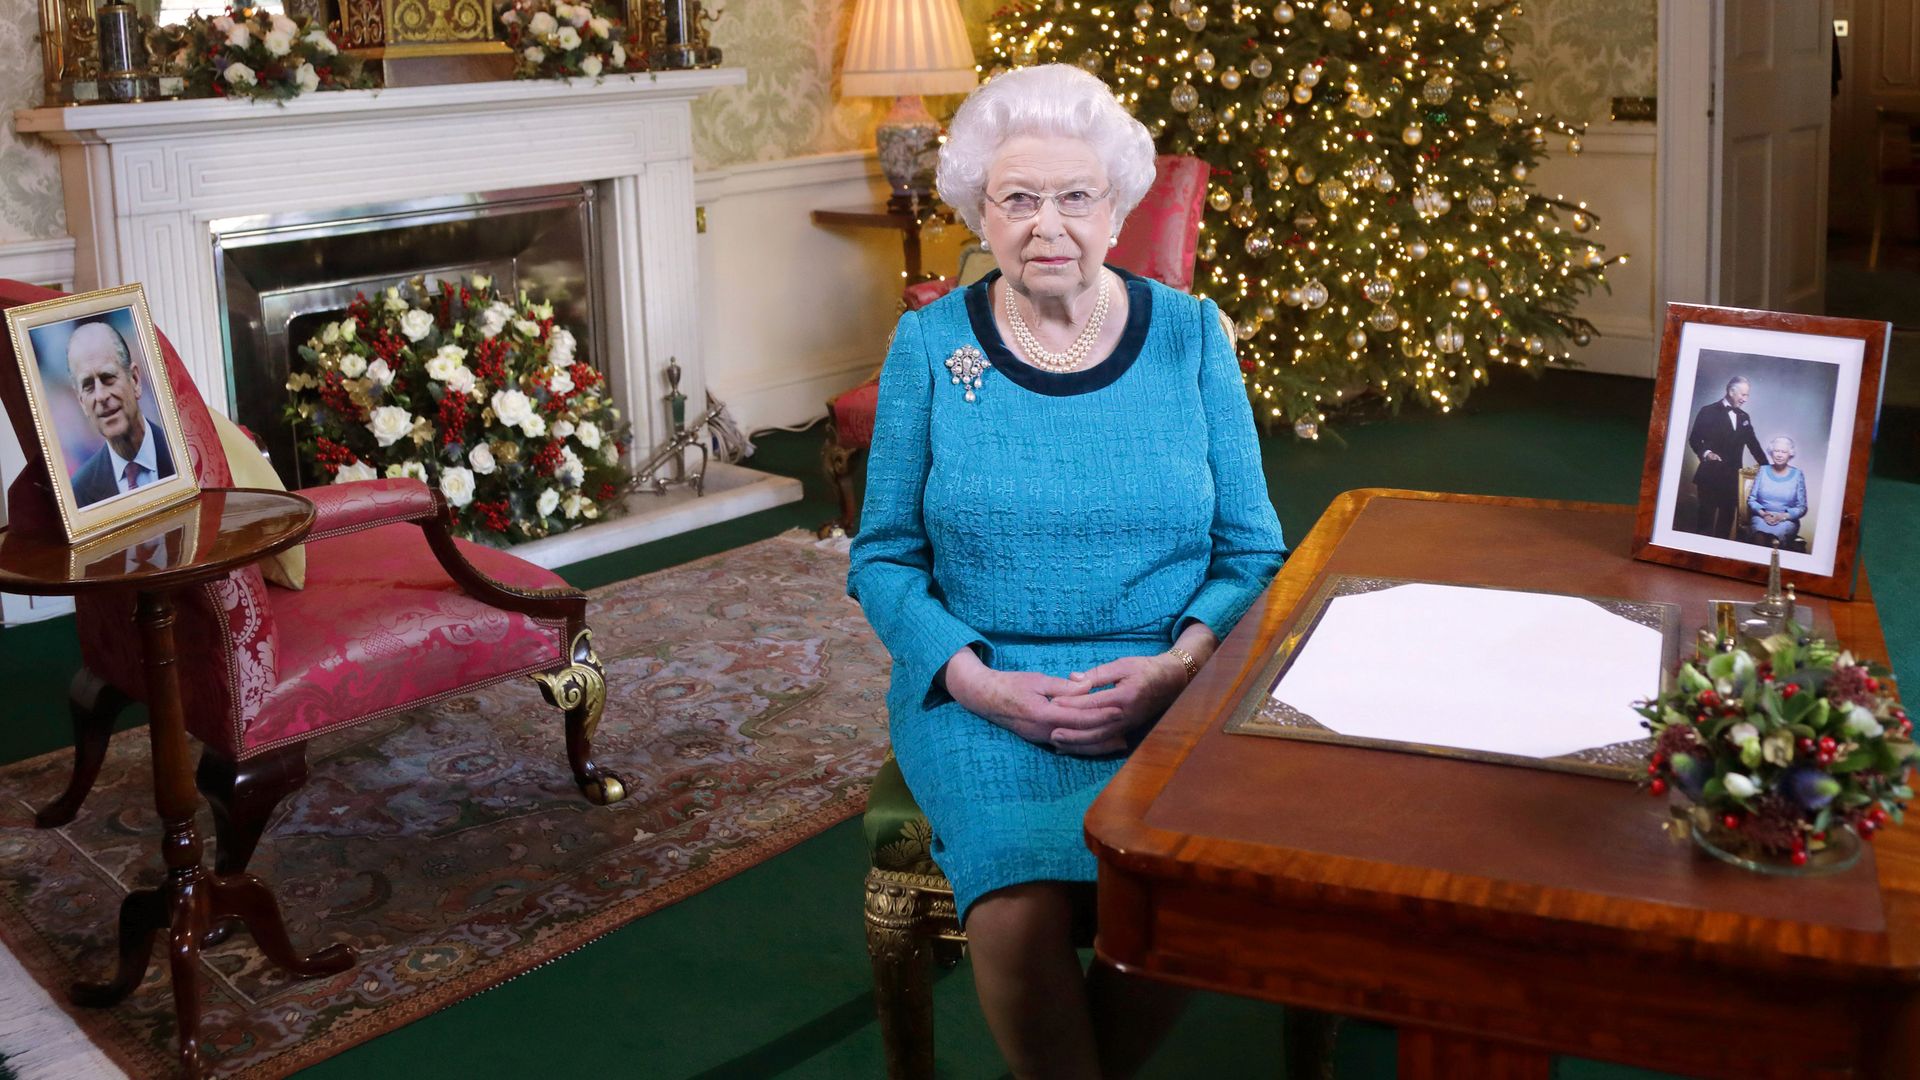 The late Queen sat in the Regency Home with pictures of Prince Philip and a Christmas tree